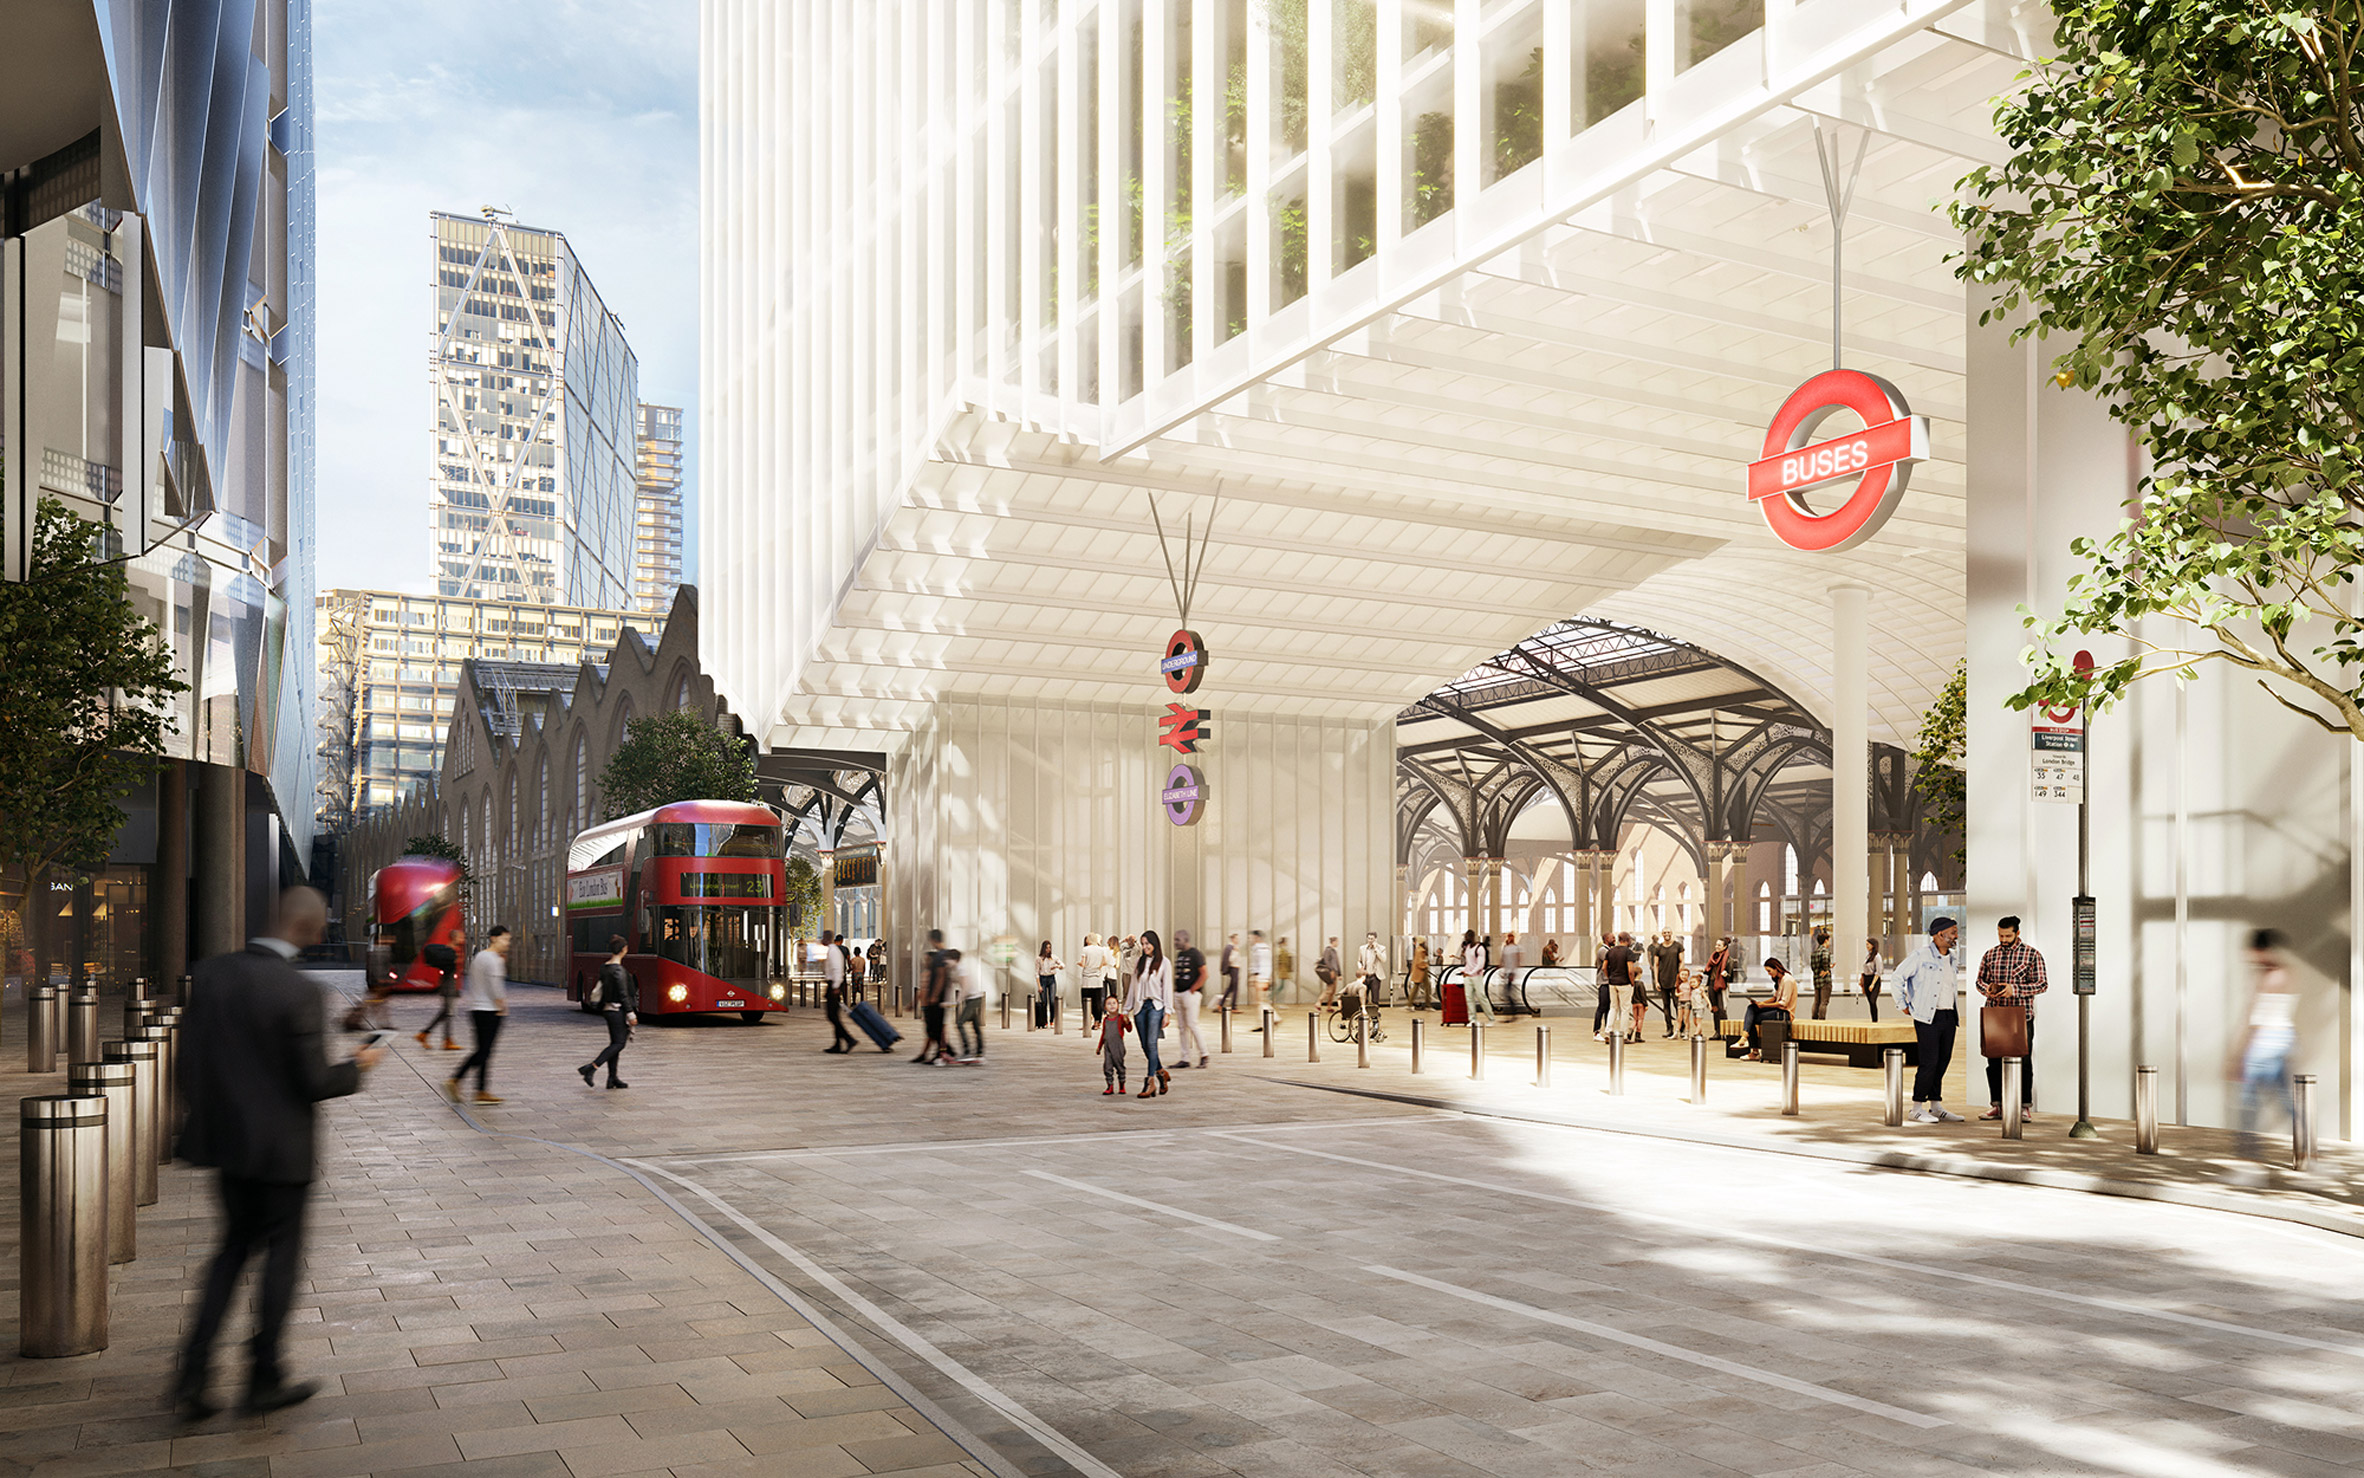 Exterior render of an entrance to Liverpool Street station